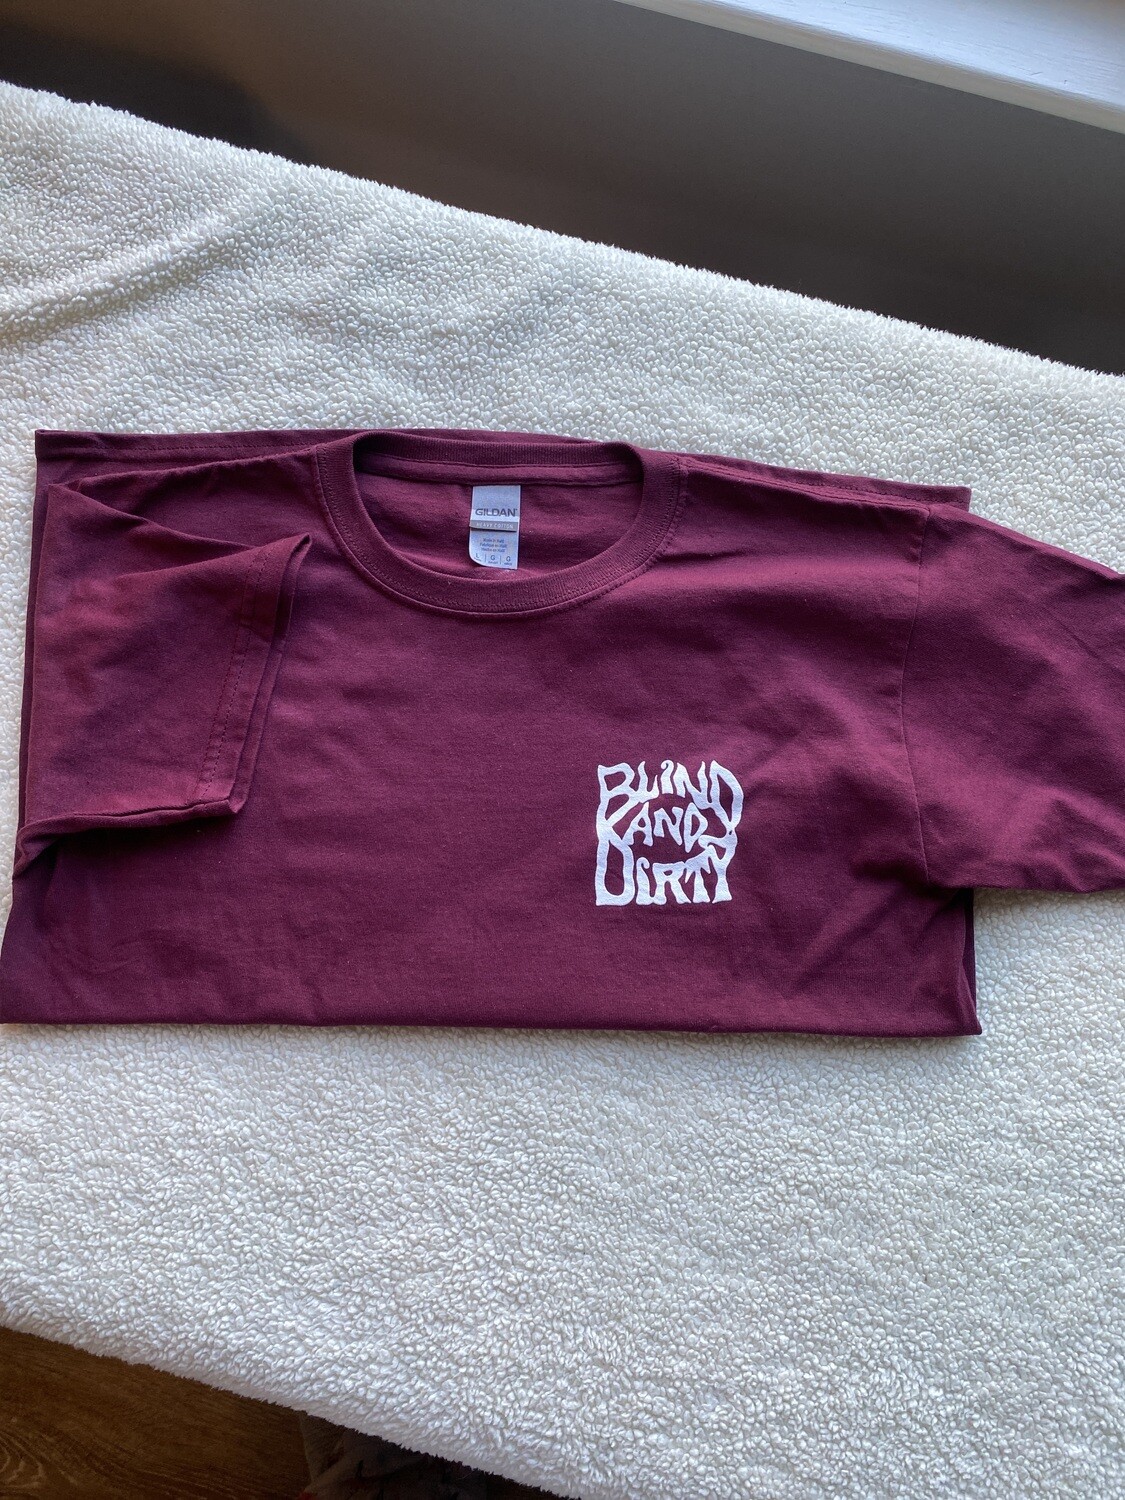 Youth Large maroon